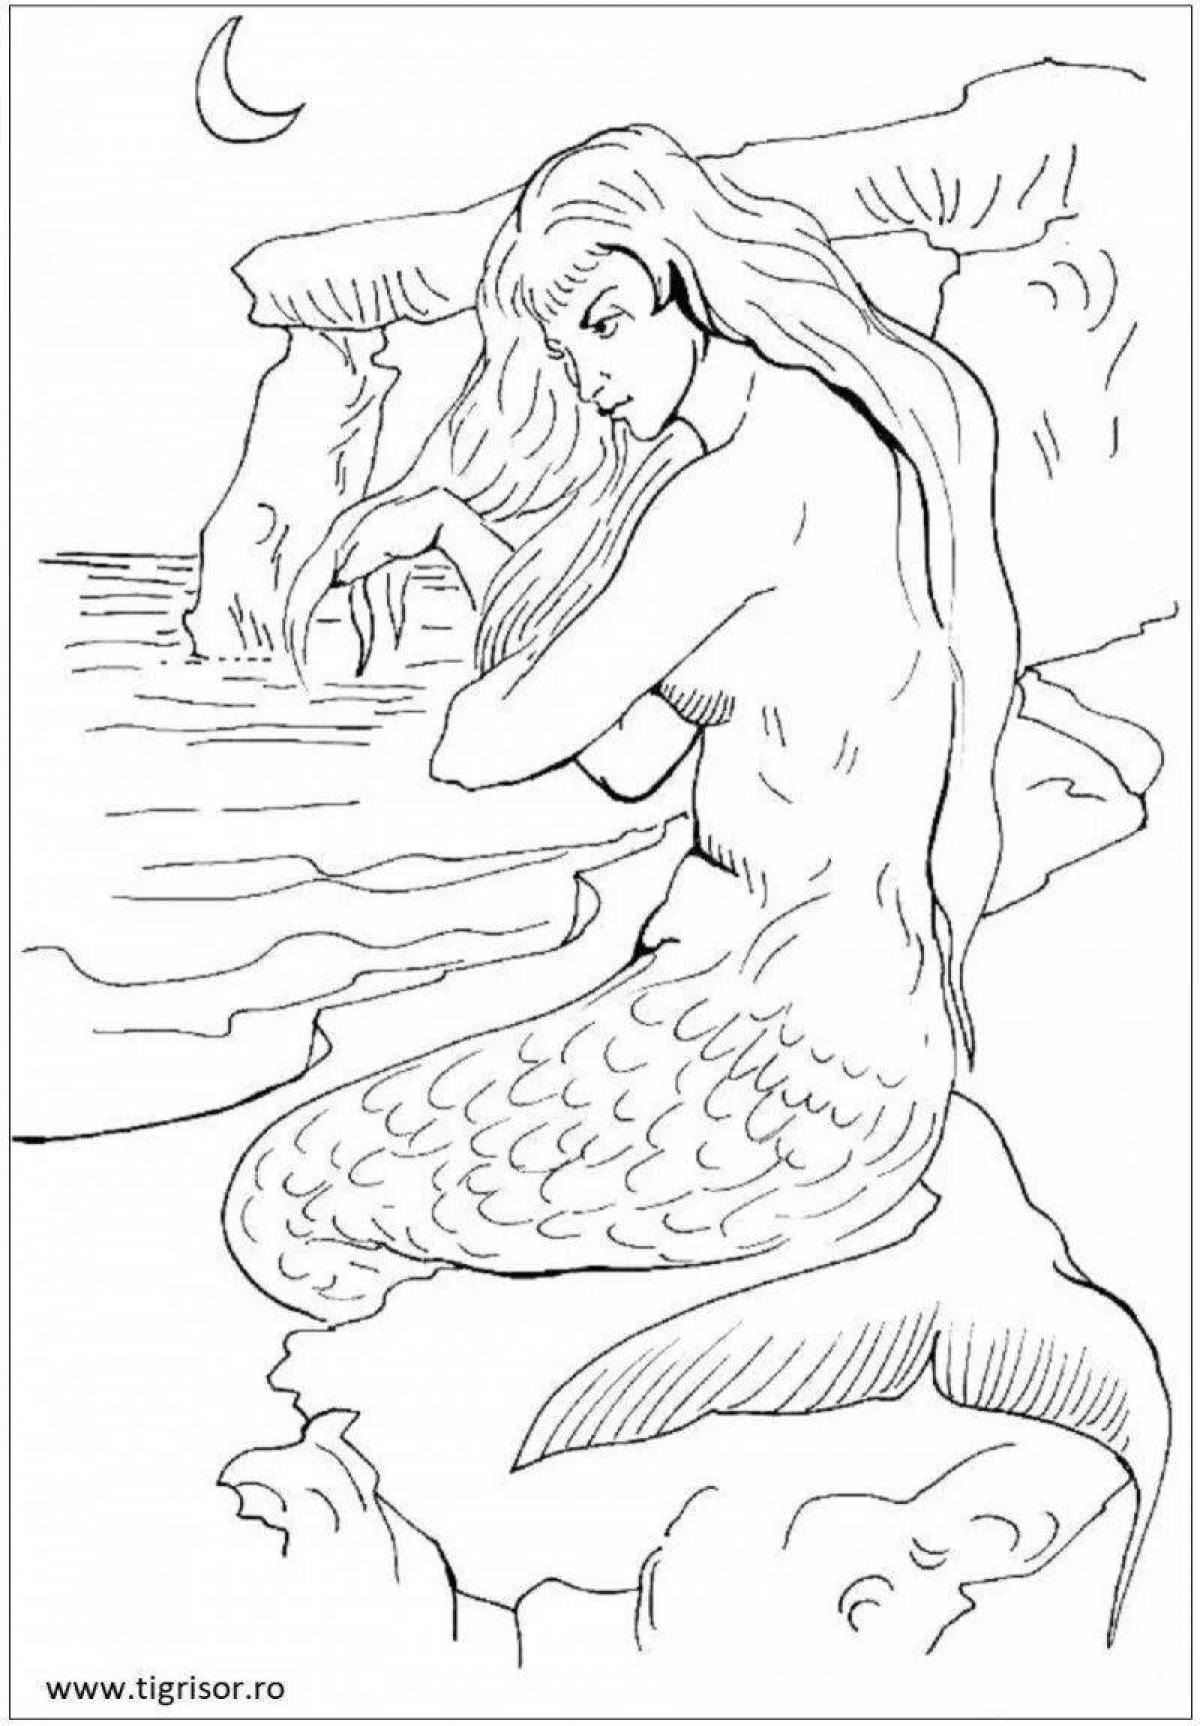 A fascinating coloring book of a witch from Slavic myths